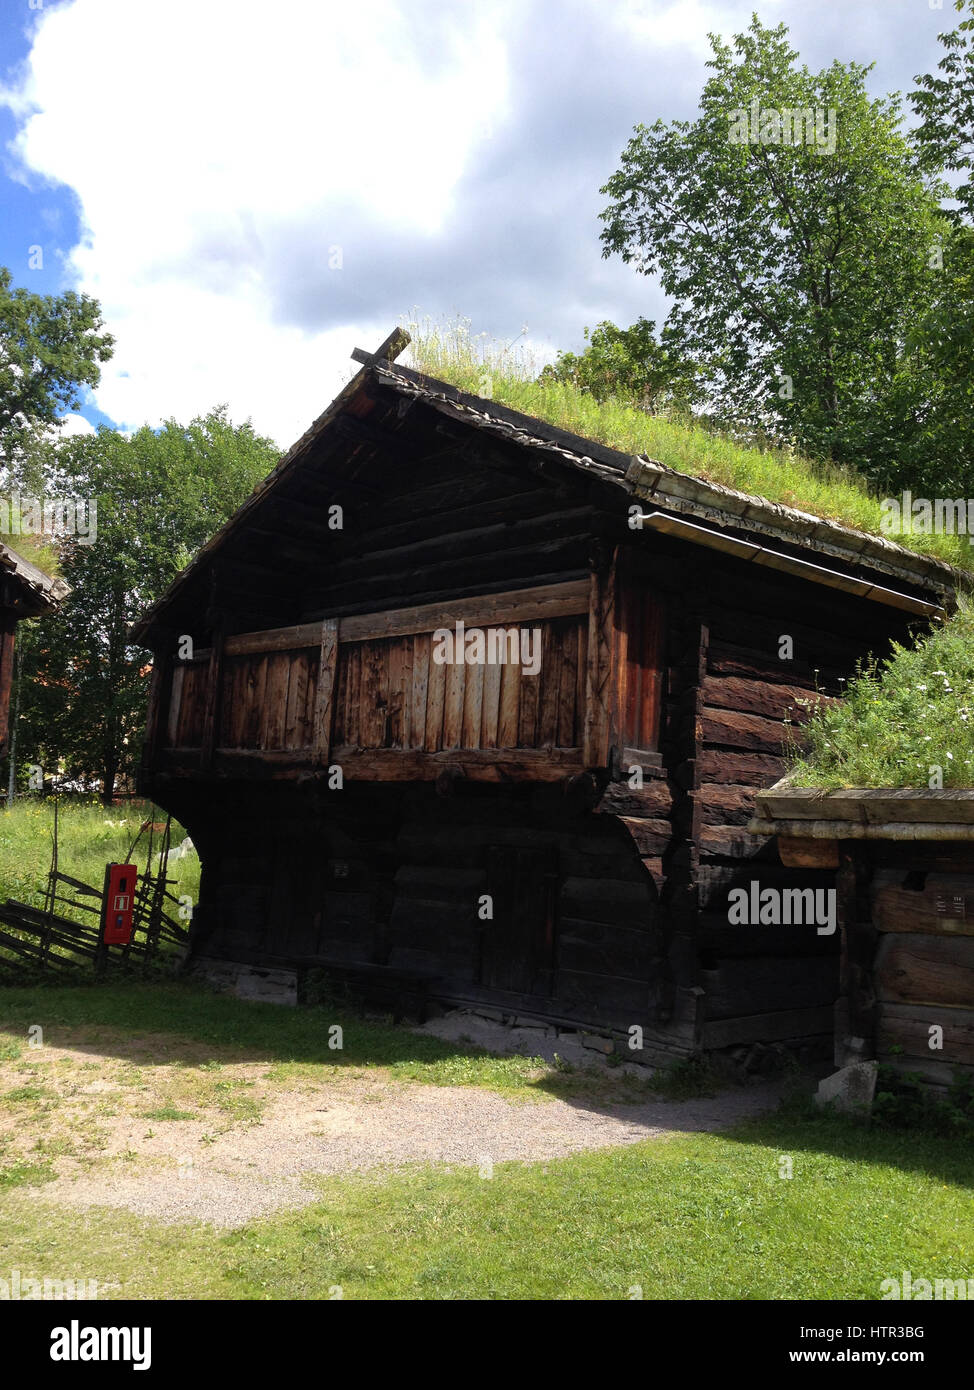 Traditional vernacular hut of early Norwegians.  Naturally insulating green roofs.  Grass growing on roof.  Traditional wooden house in Oslo Norway. Stock Photo